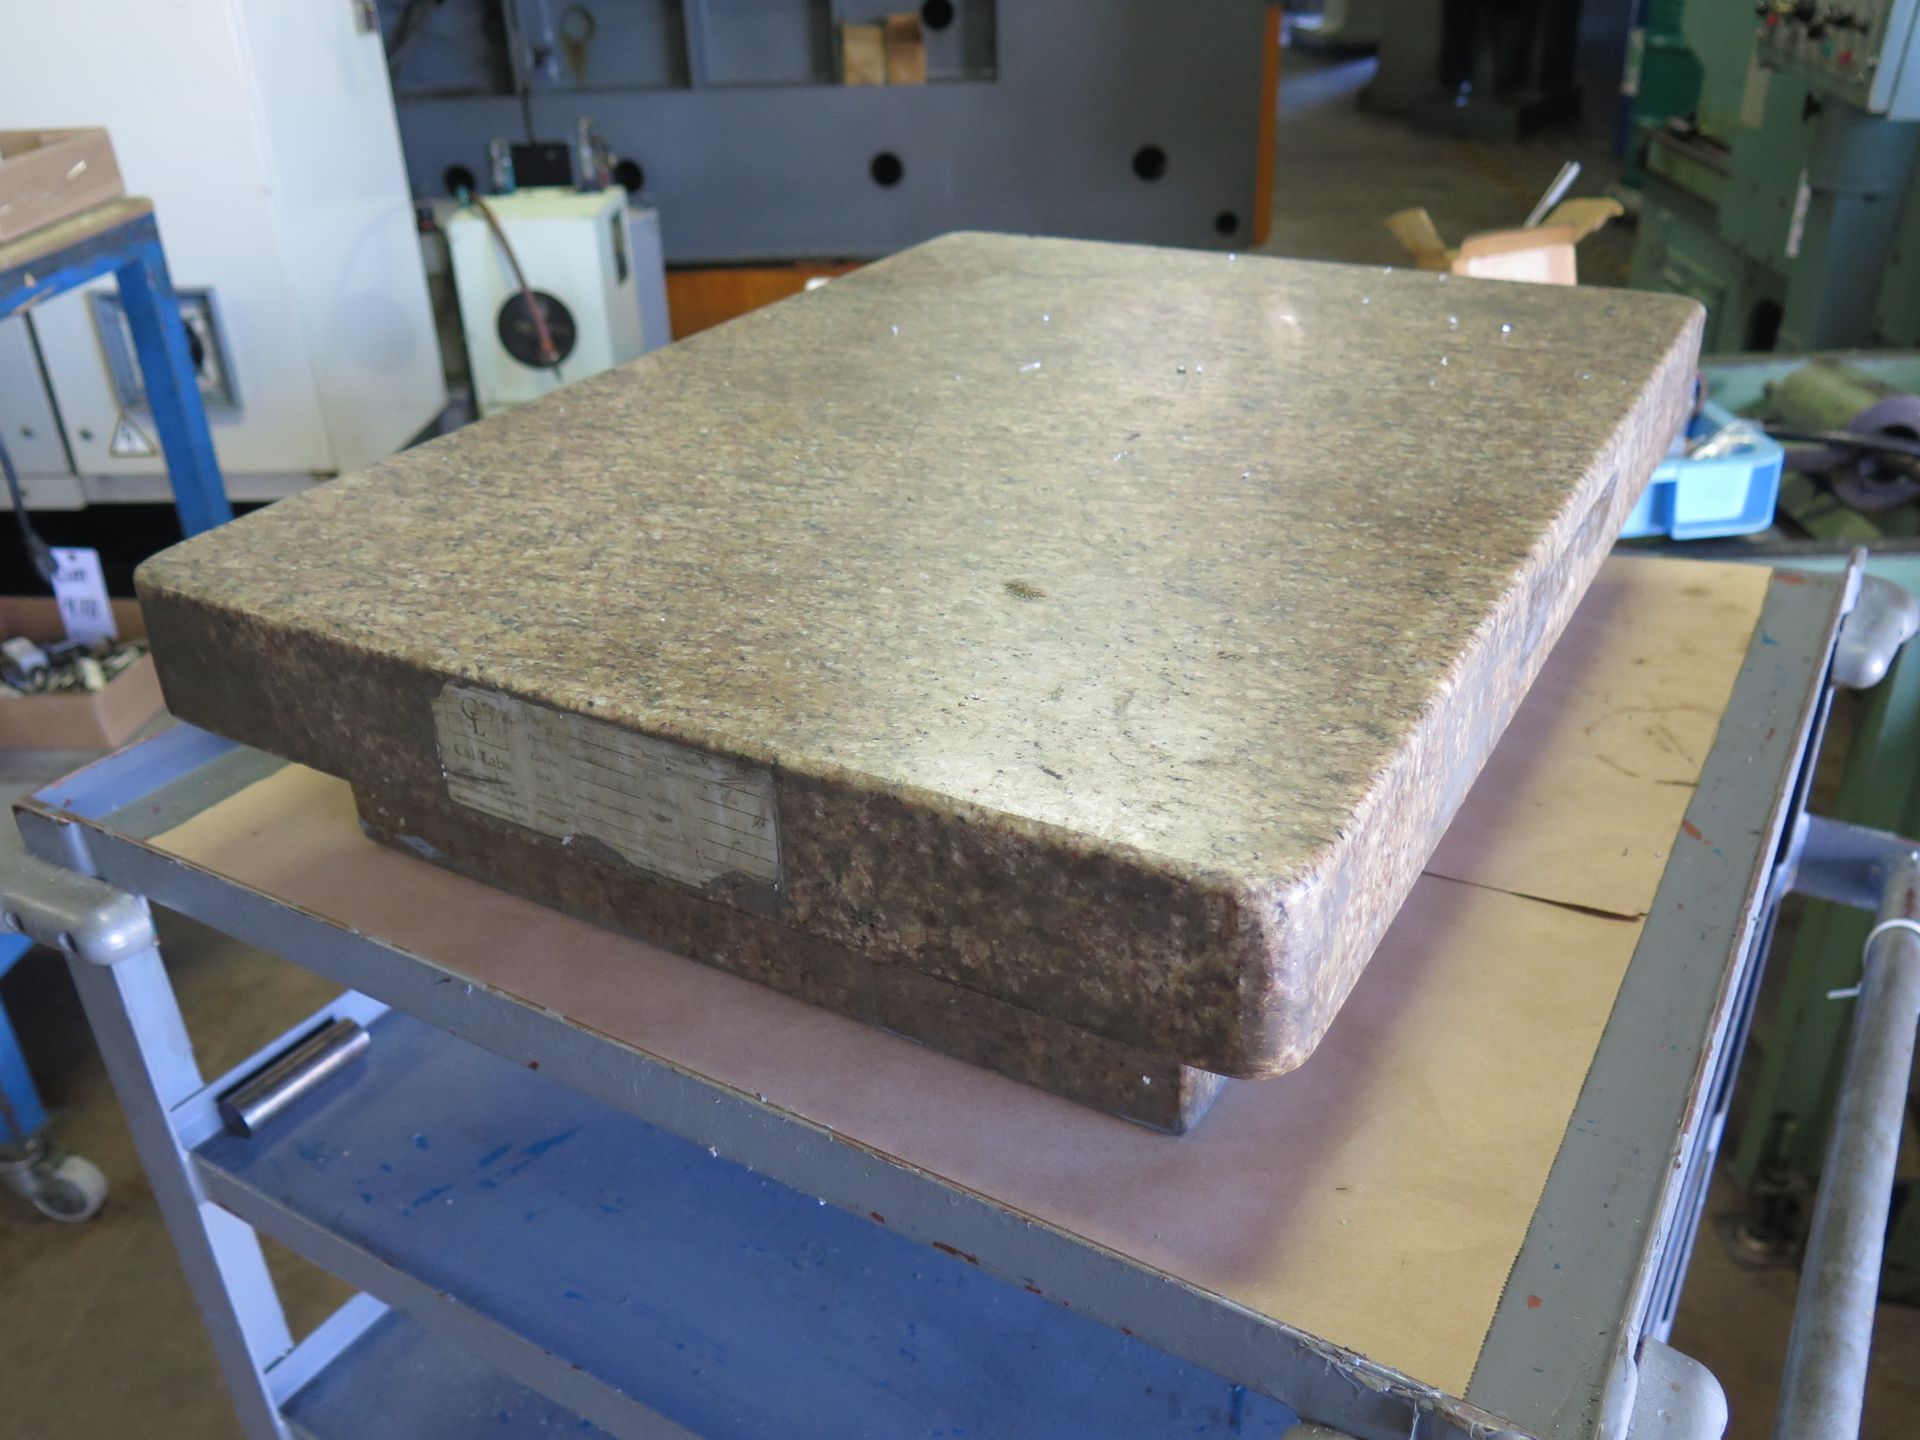 18" X 24" X 5" 4-LEDGE GRANITE SURFACE PLATE W/ ROLLING STAND - Image 2 of 2